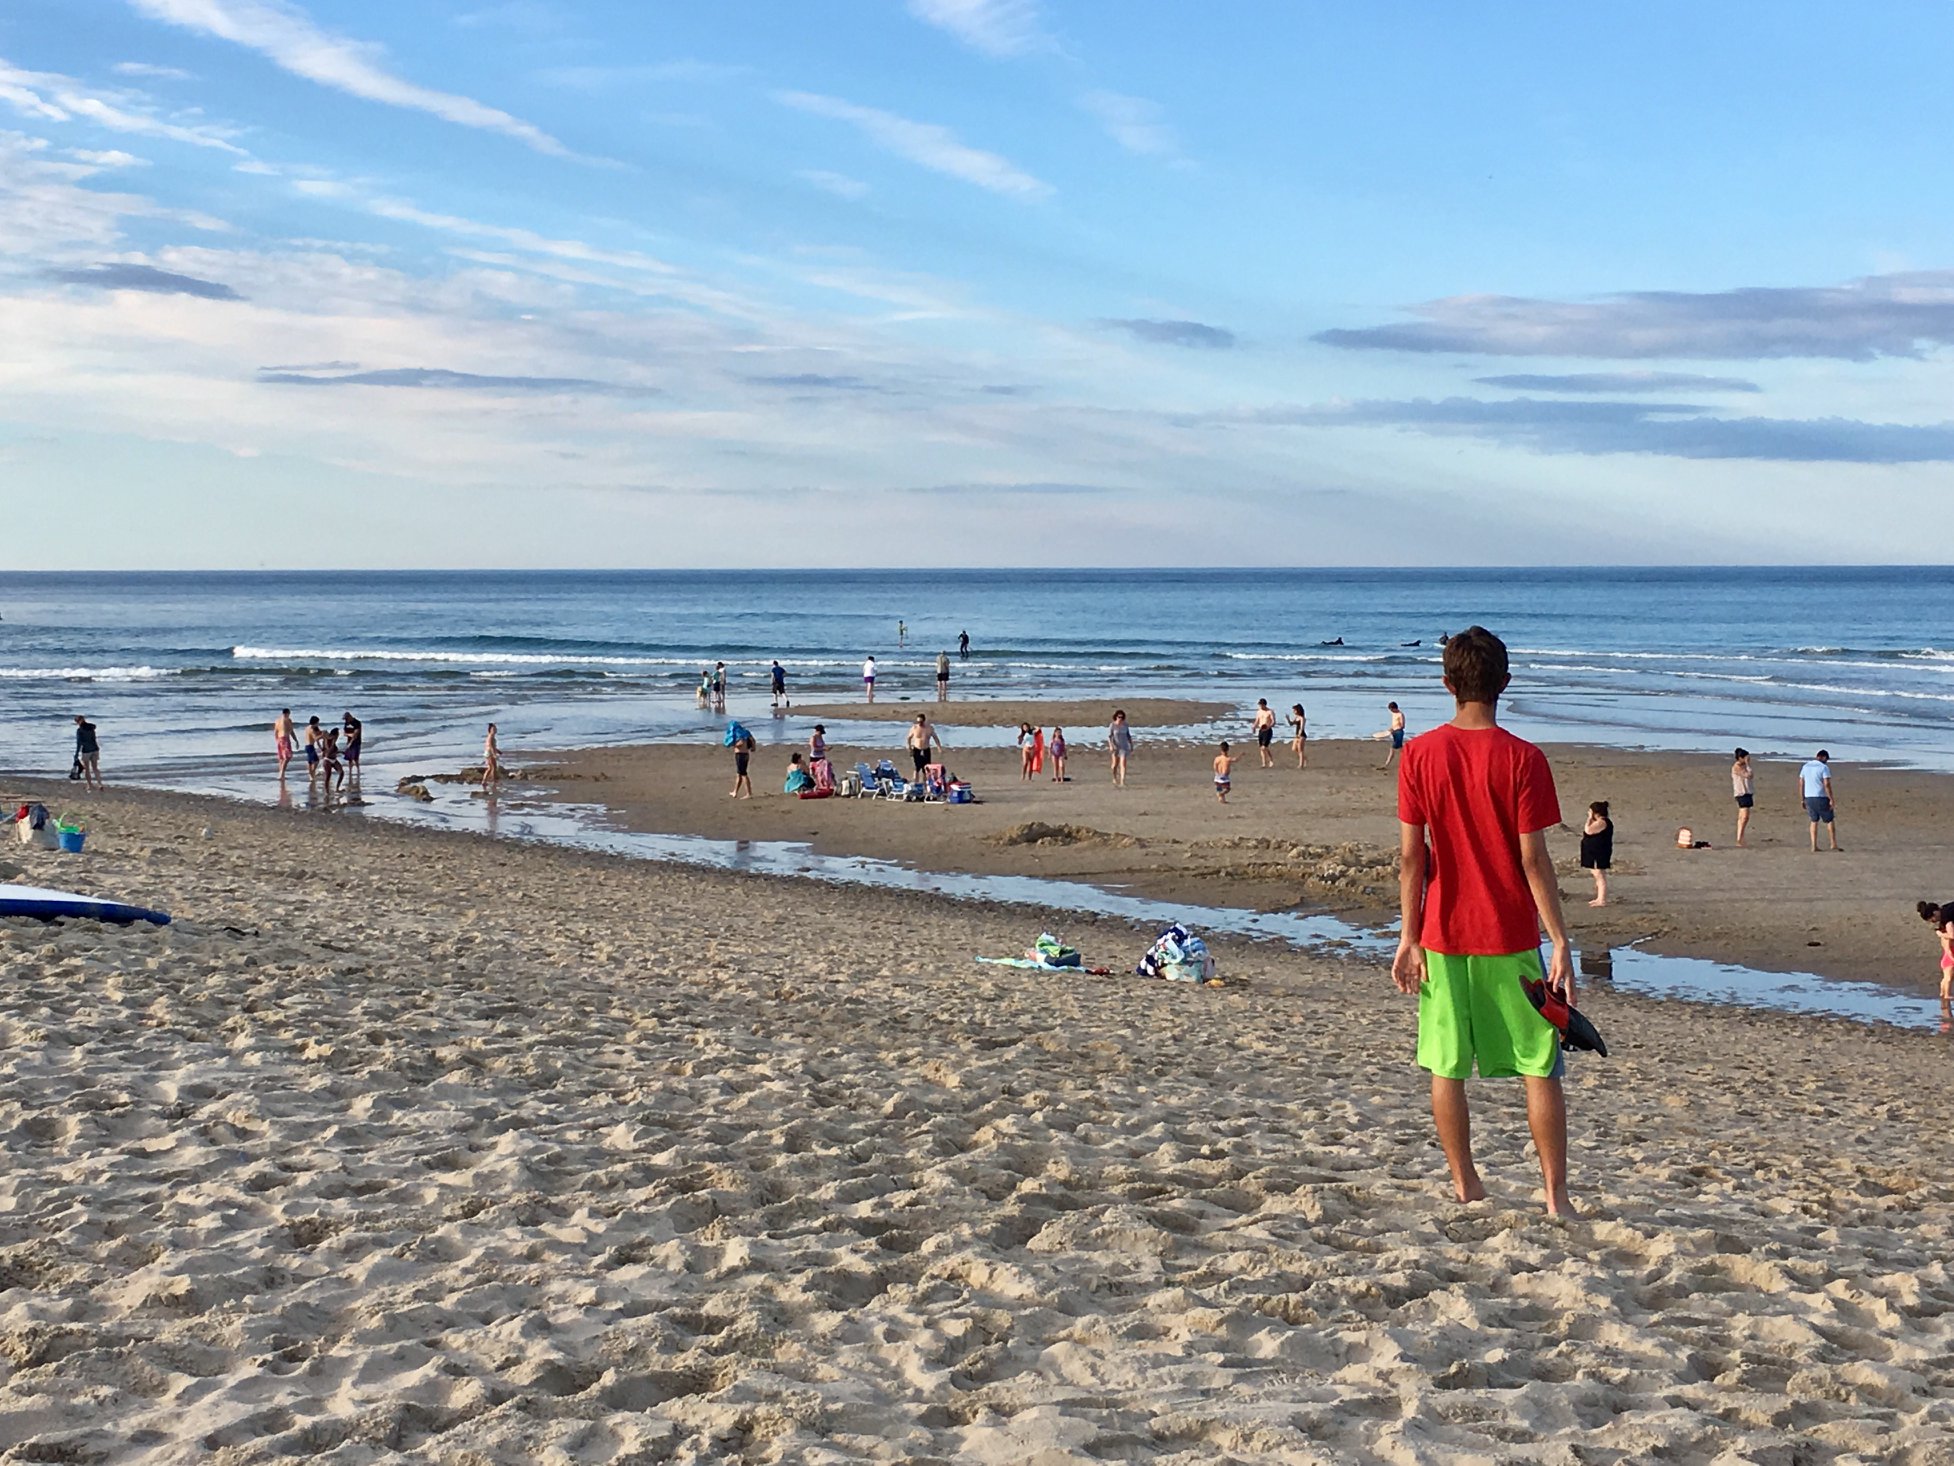 Summer evening at Coast Guard Beach. Man in red shirt looks out to the ocean waves lapping up on the beach. A blue sky is dotted with thin, wispy clouds. People sit and stand along the beach.